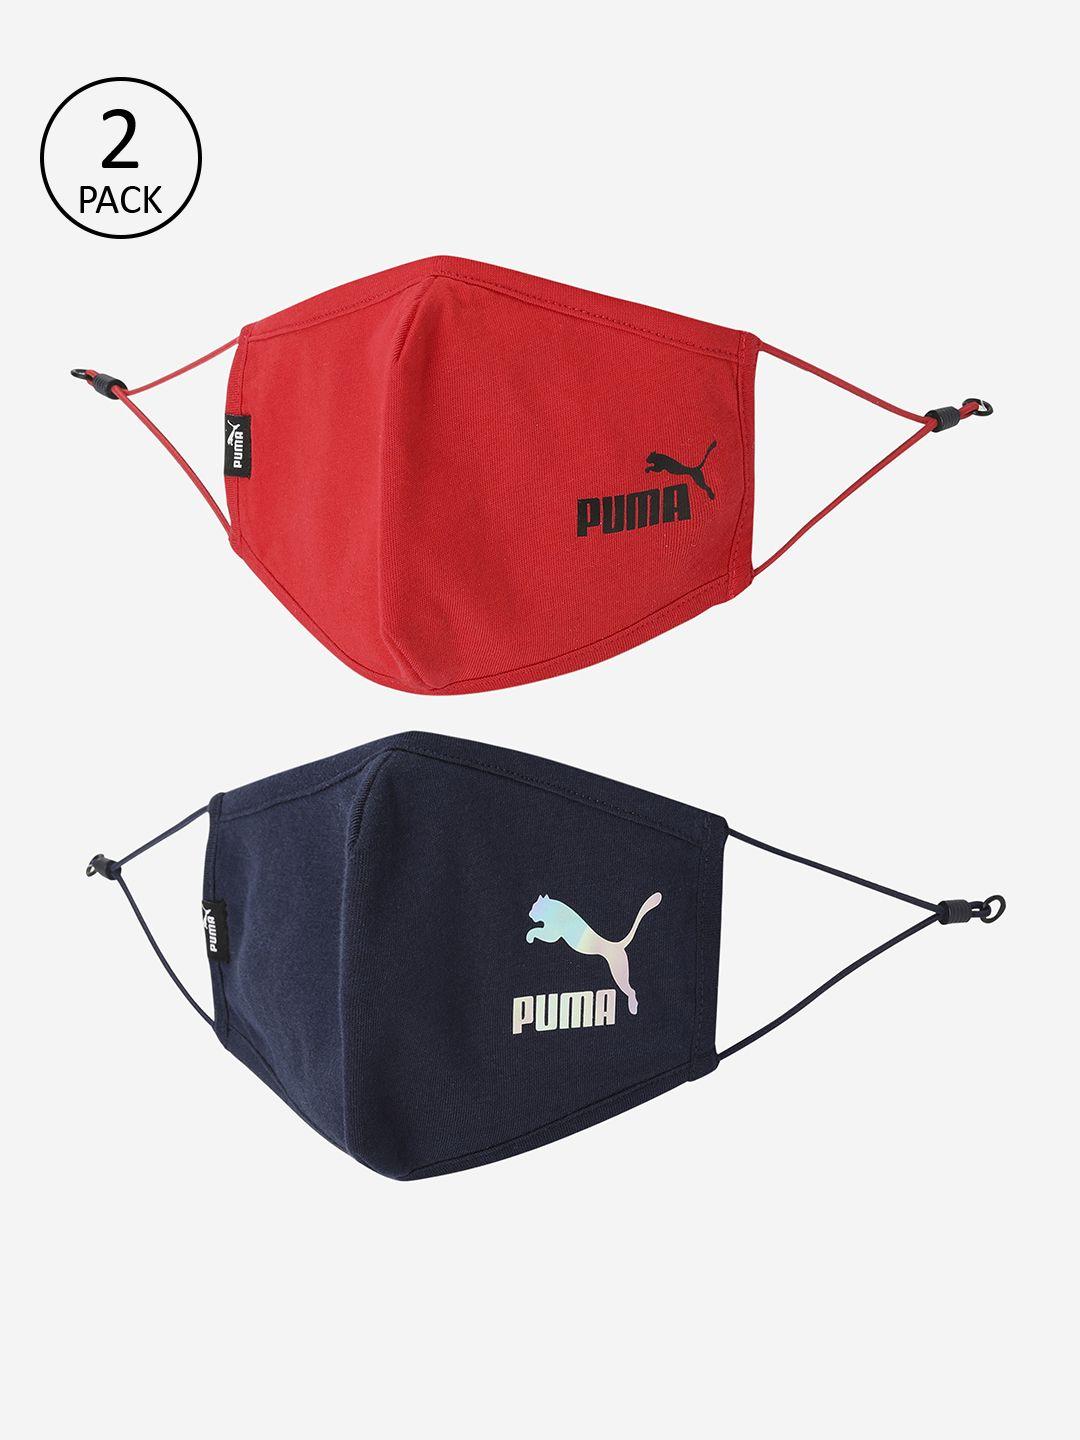 puma adults pack of 2 reusable 5-ply cloth masks